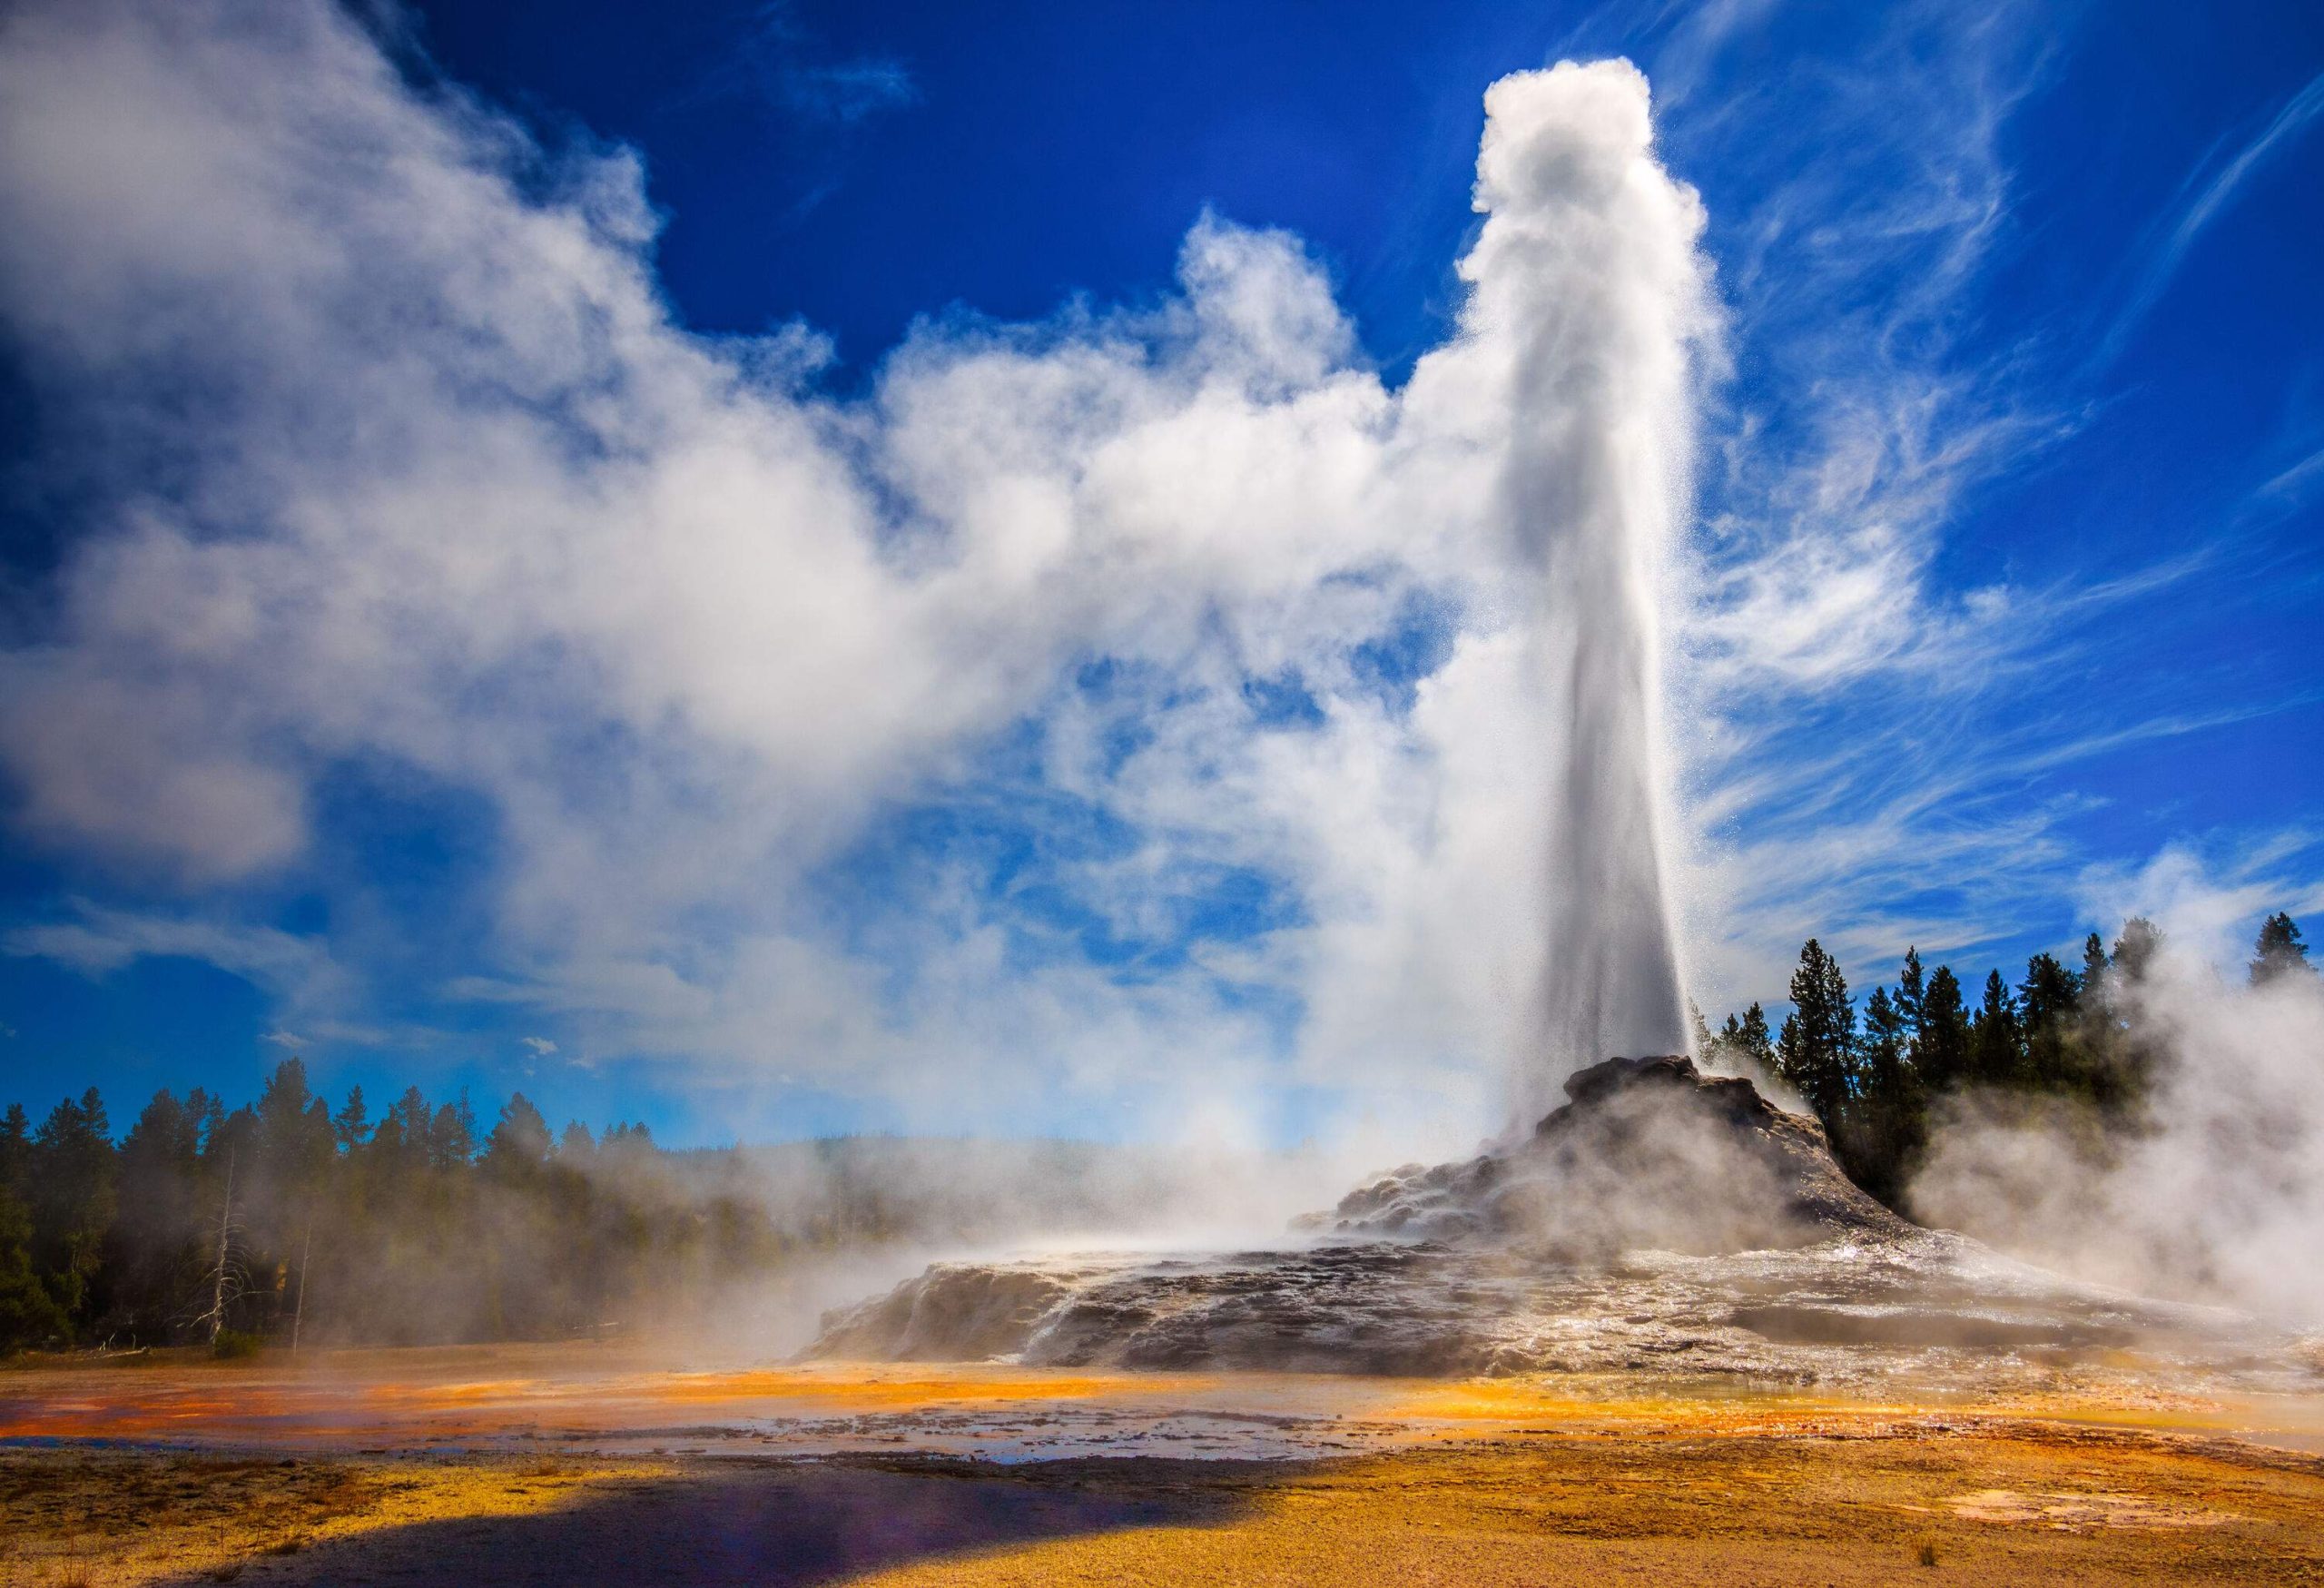 A cone geyser surrounded by lush trees erupts water in a vertical column towards the deep blue sky.